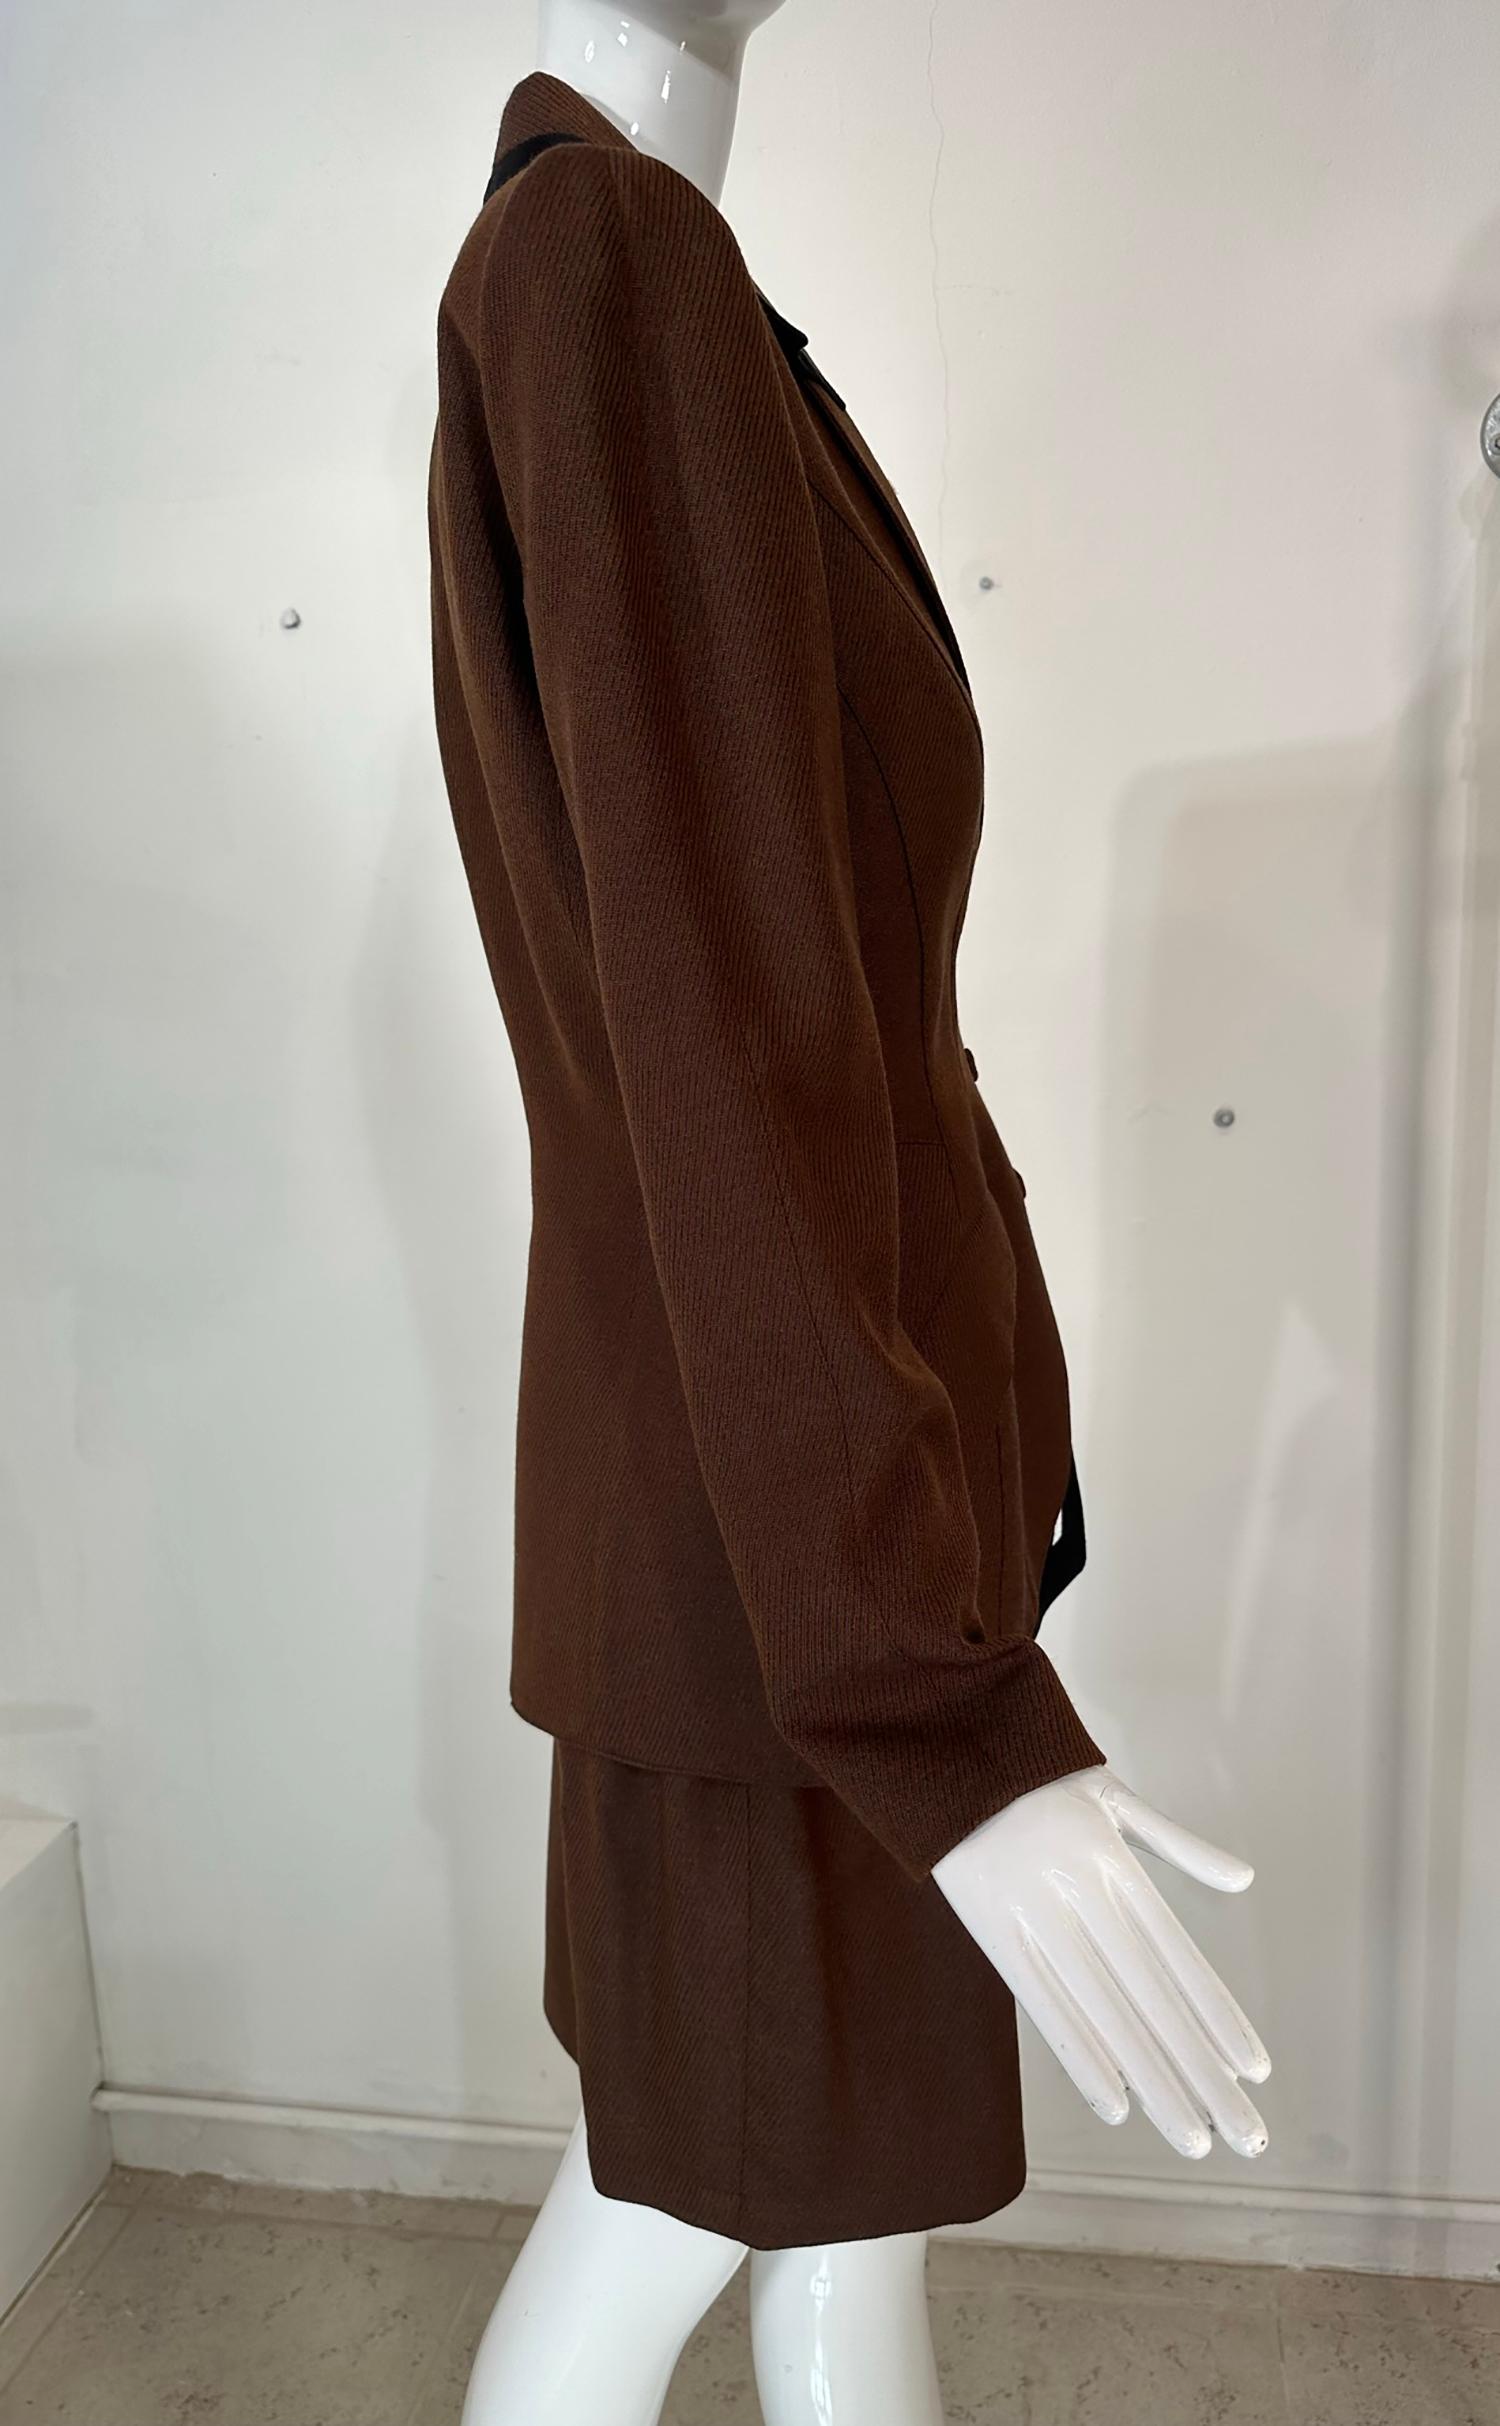 Thierry Mugler Brown Wool Twill Skirt Set Cut Out Collar & Hem 1980s 40 In Good Condition For Sale In West Palm Beach, FL